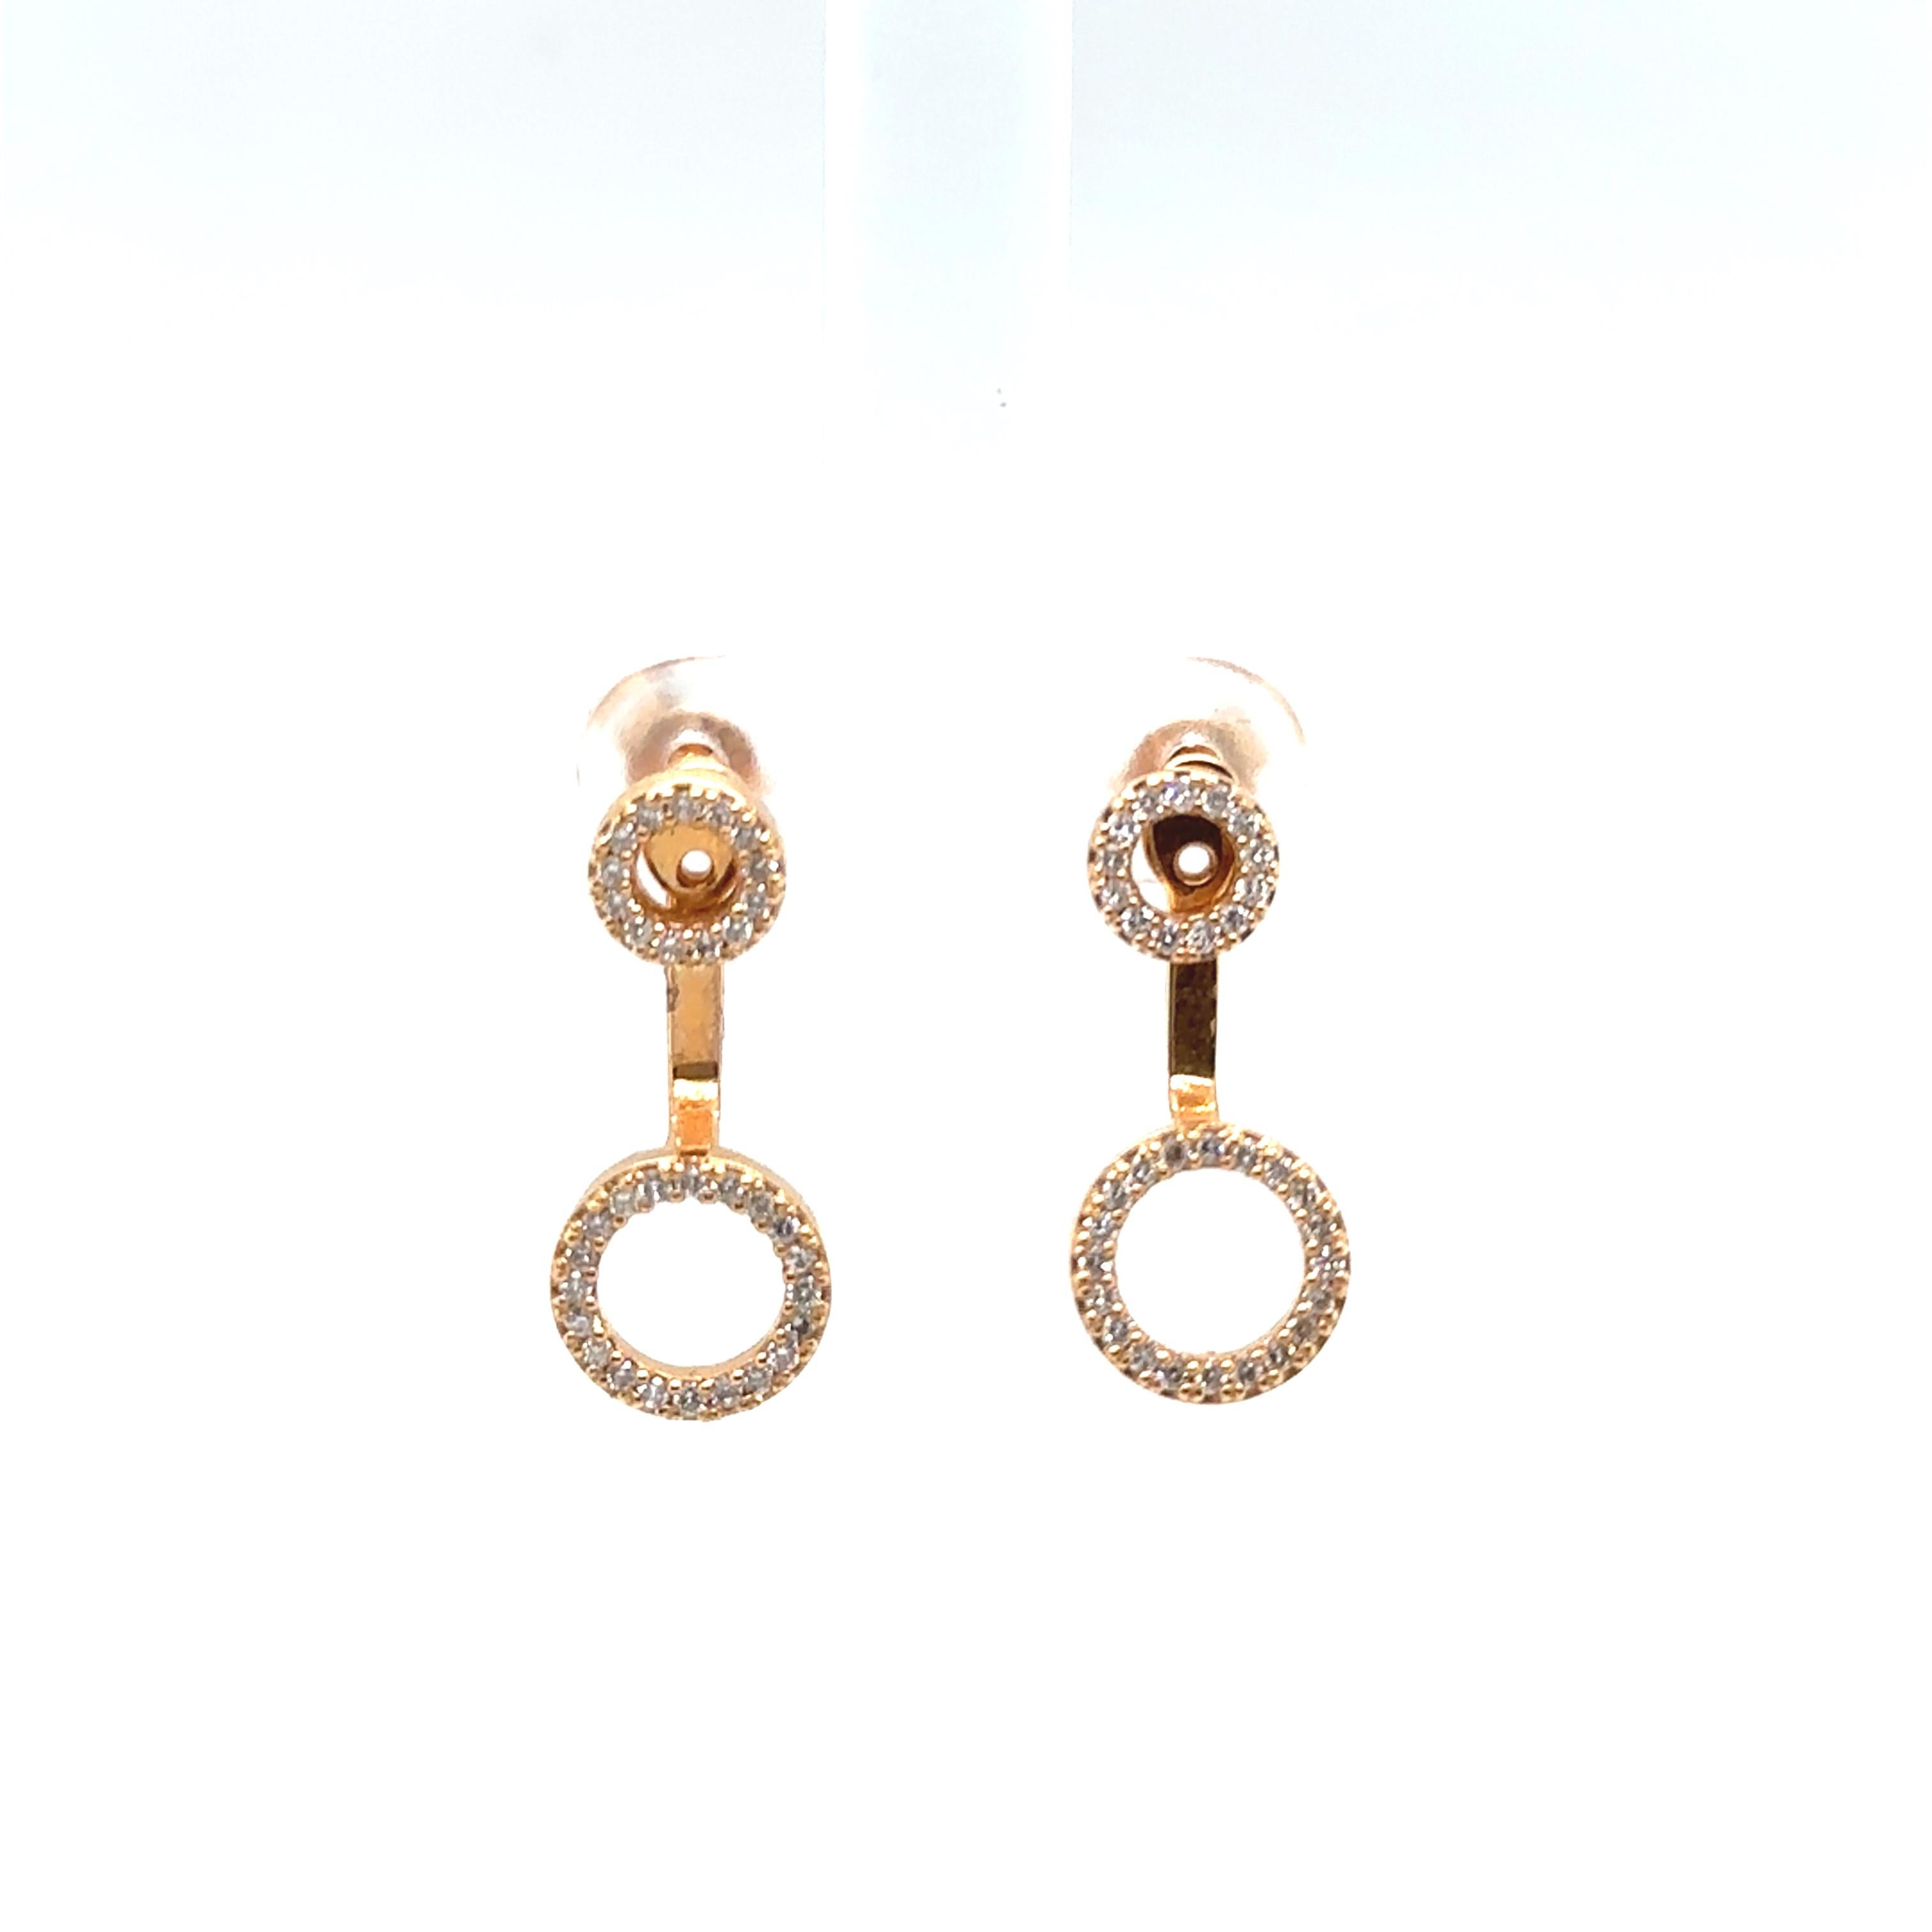 Fine Quality Drops & Studs Earring Set w/ 0.68ct of Diamonds in 18ct Yellow Gold In New Condition For Sale In London, GB